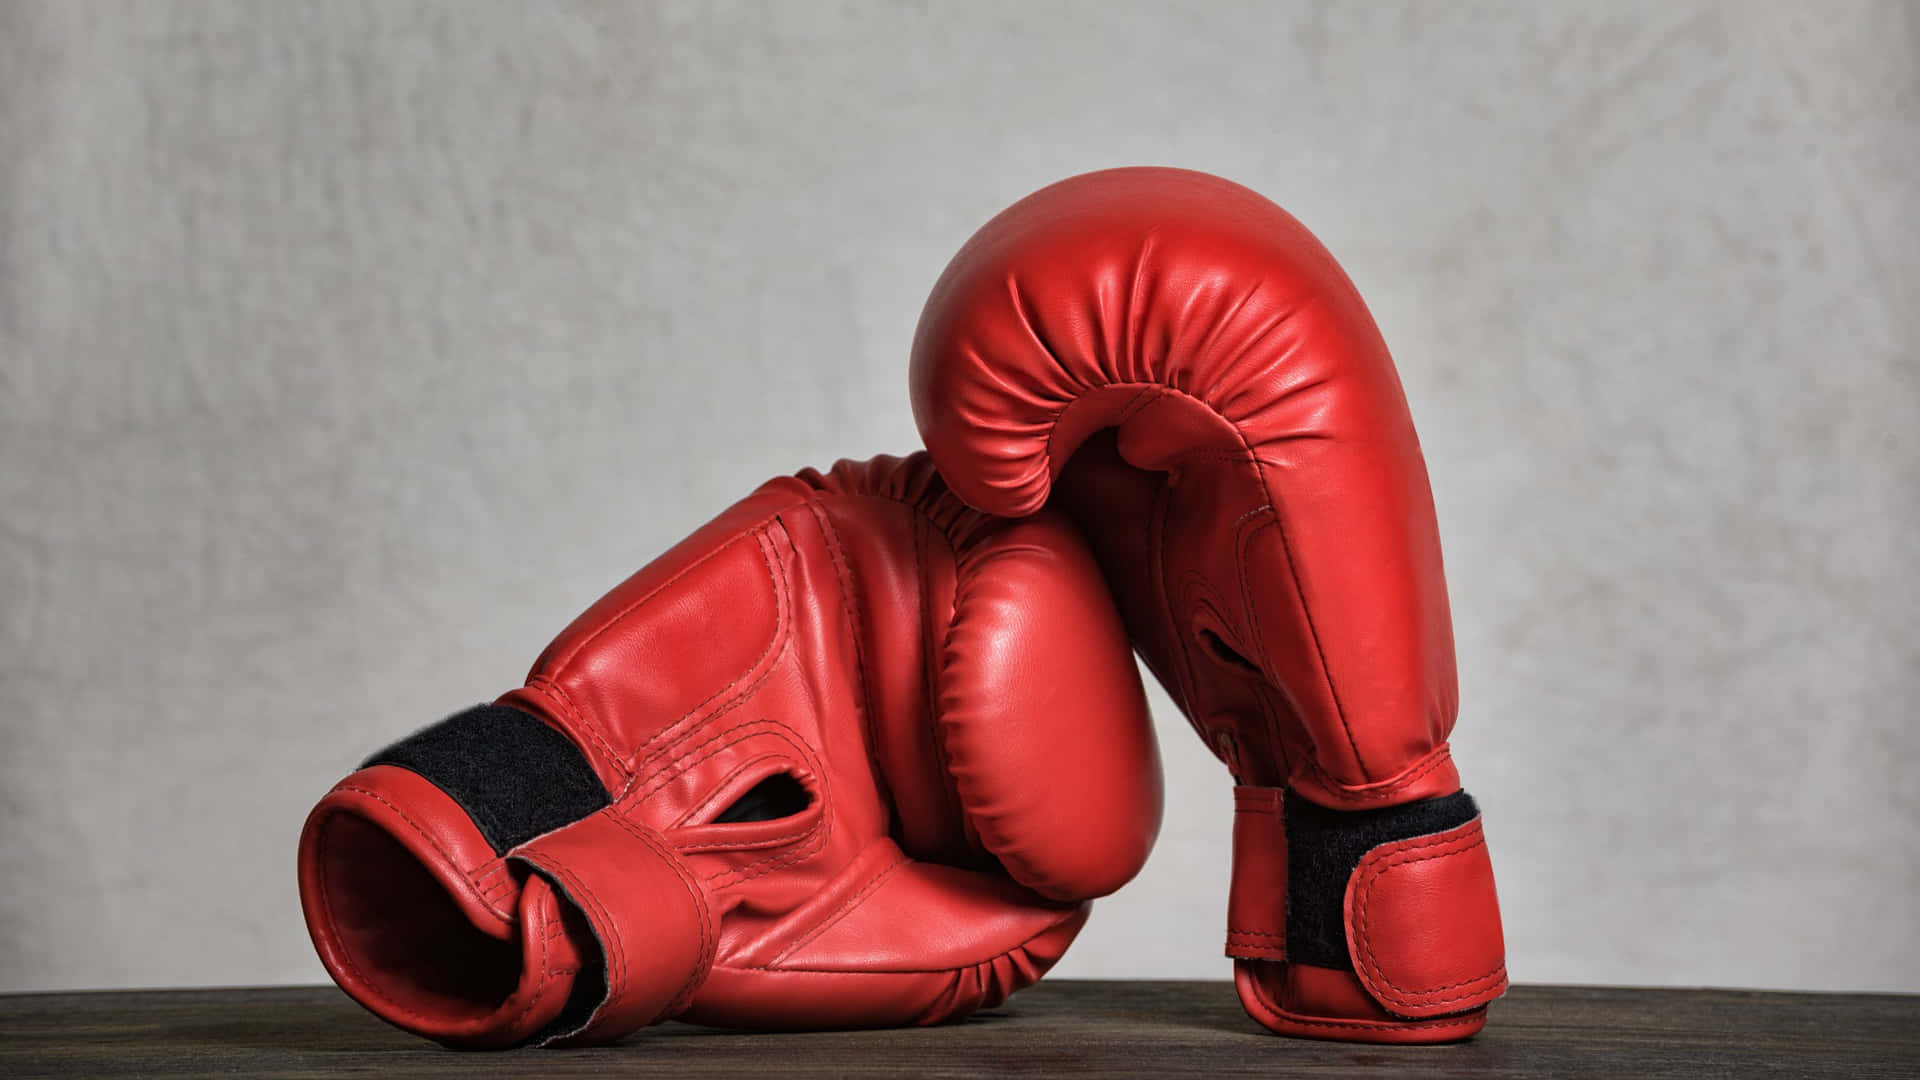 Red Boxing Gloves Restingon Wooden Surface Wallpaper